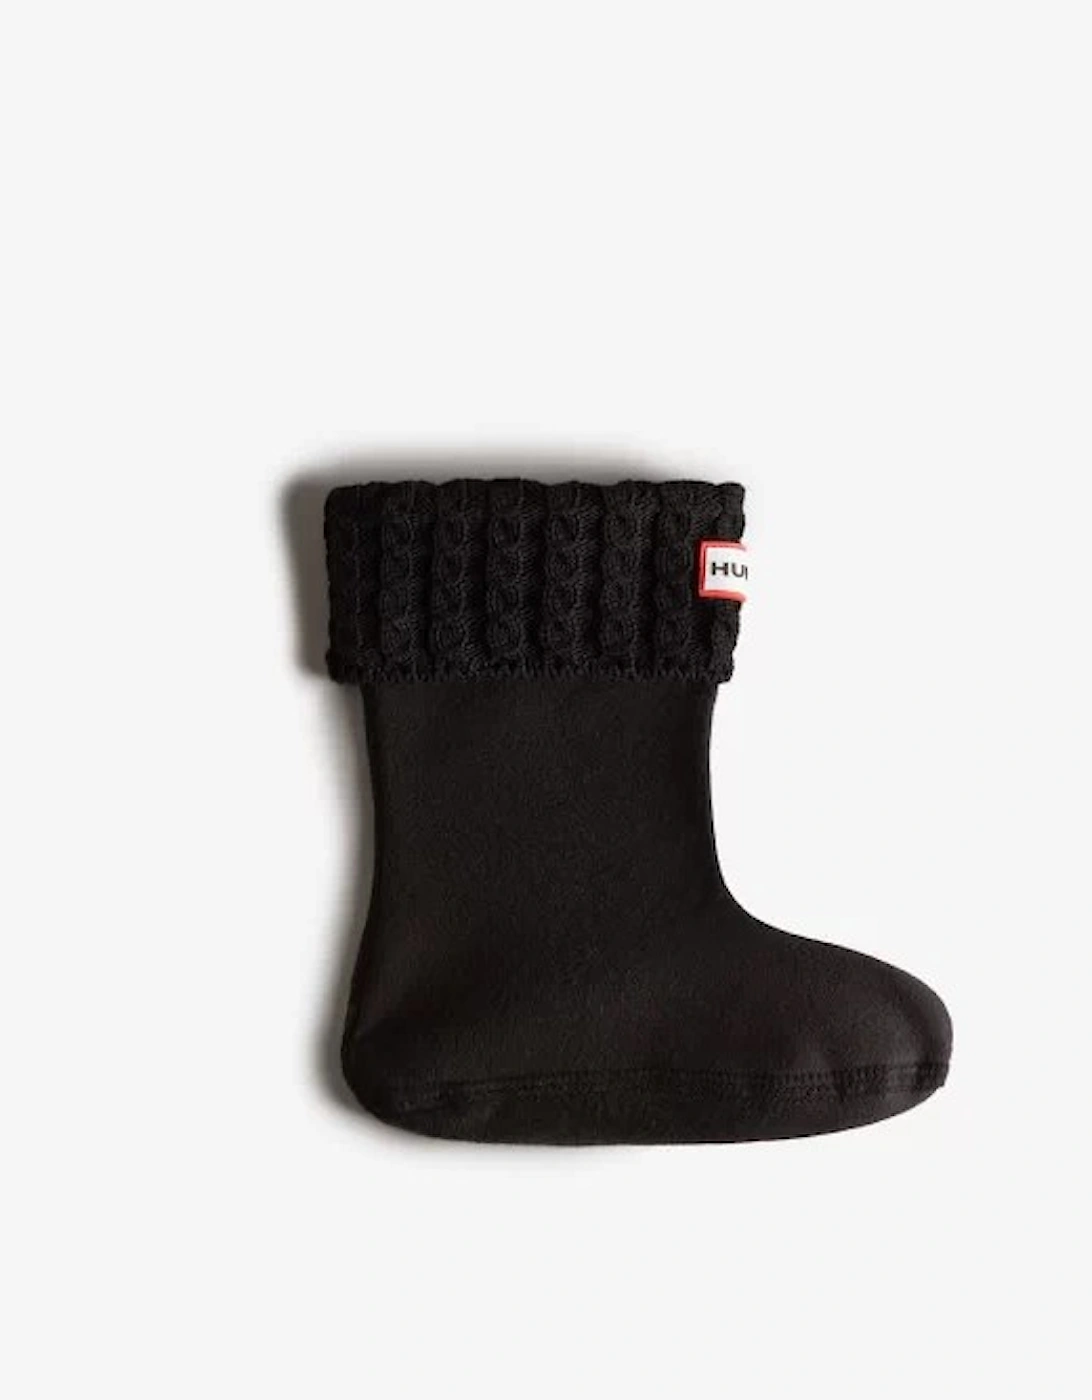 Kids Recycled Mini Cable Boot Socks Black